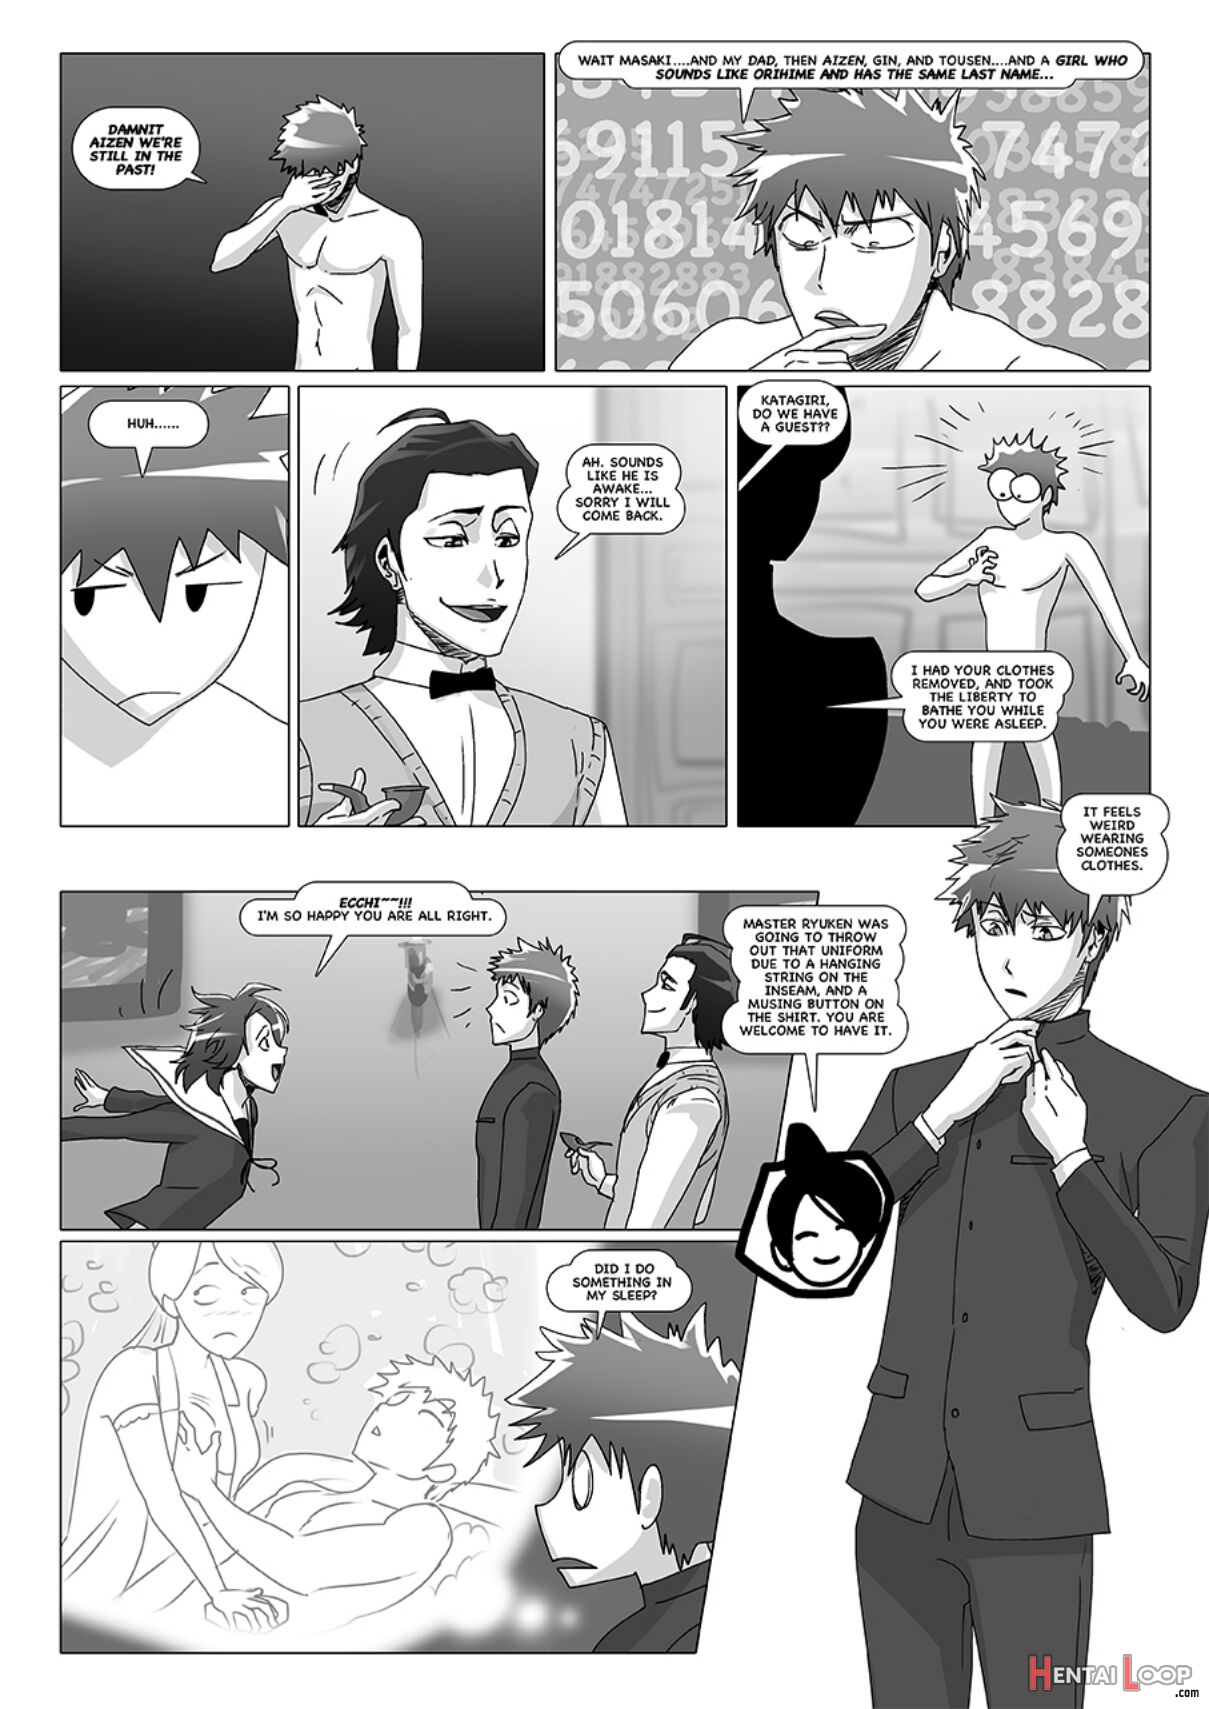 Happy To Serve You - Xxx Version page 400